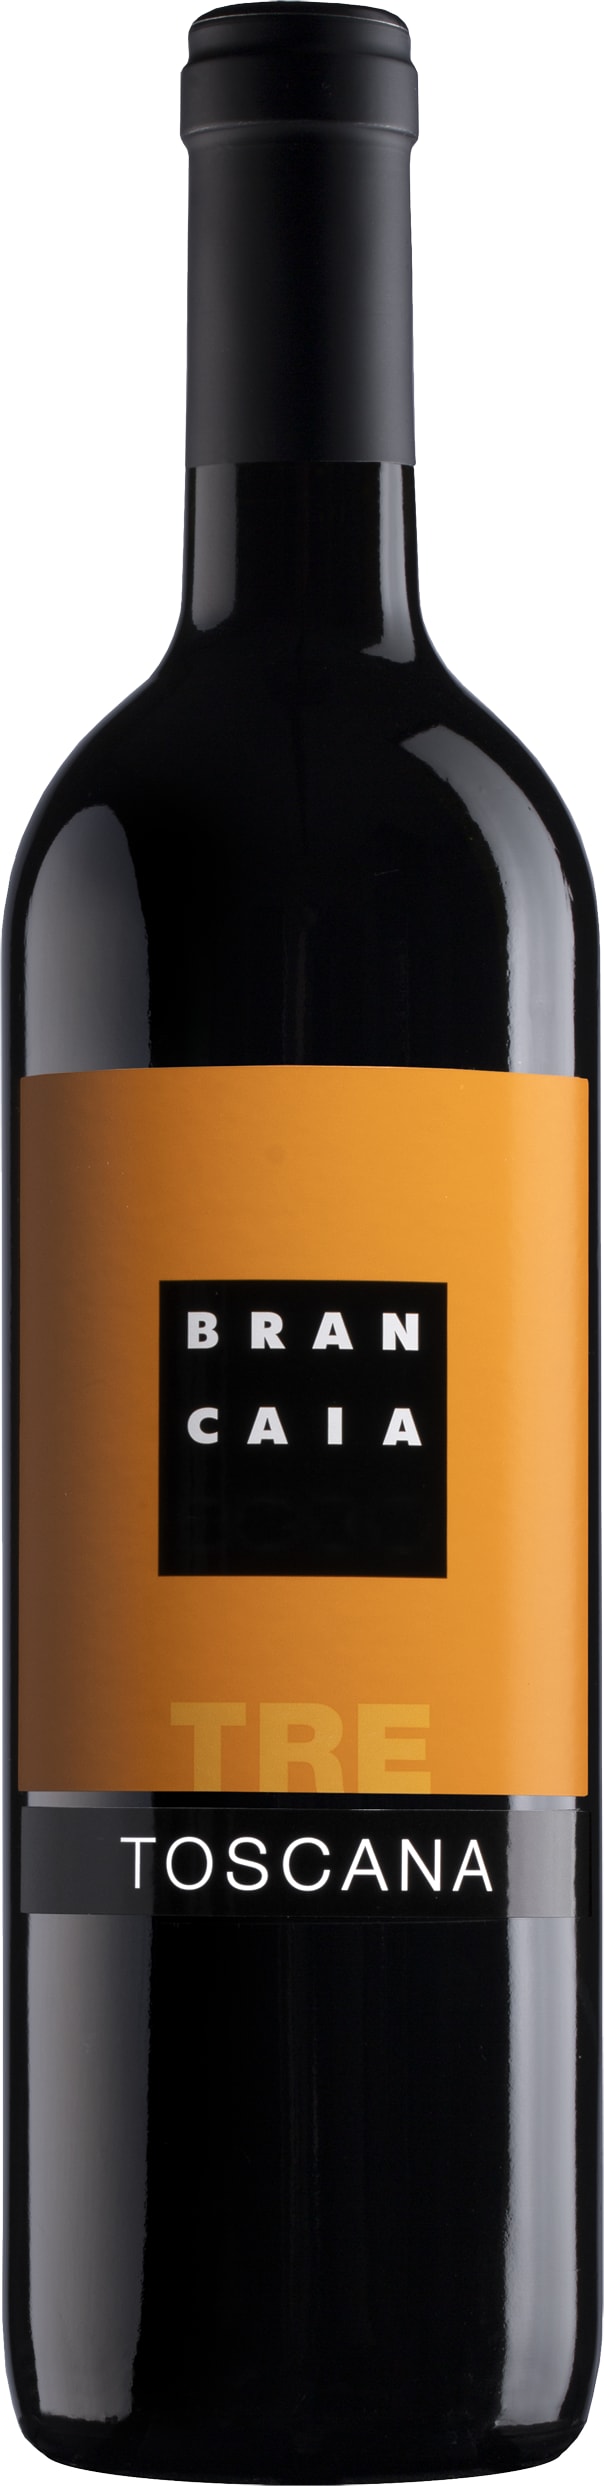 Casa Brancaia Tre IGT Rosso di Toscana 2021 75cl - Buy Casa Brancaia Wines from GREAT WINES DIRECT wine shop